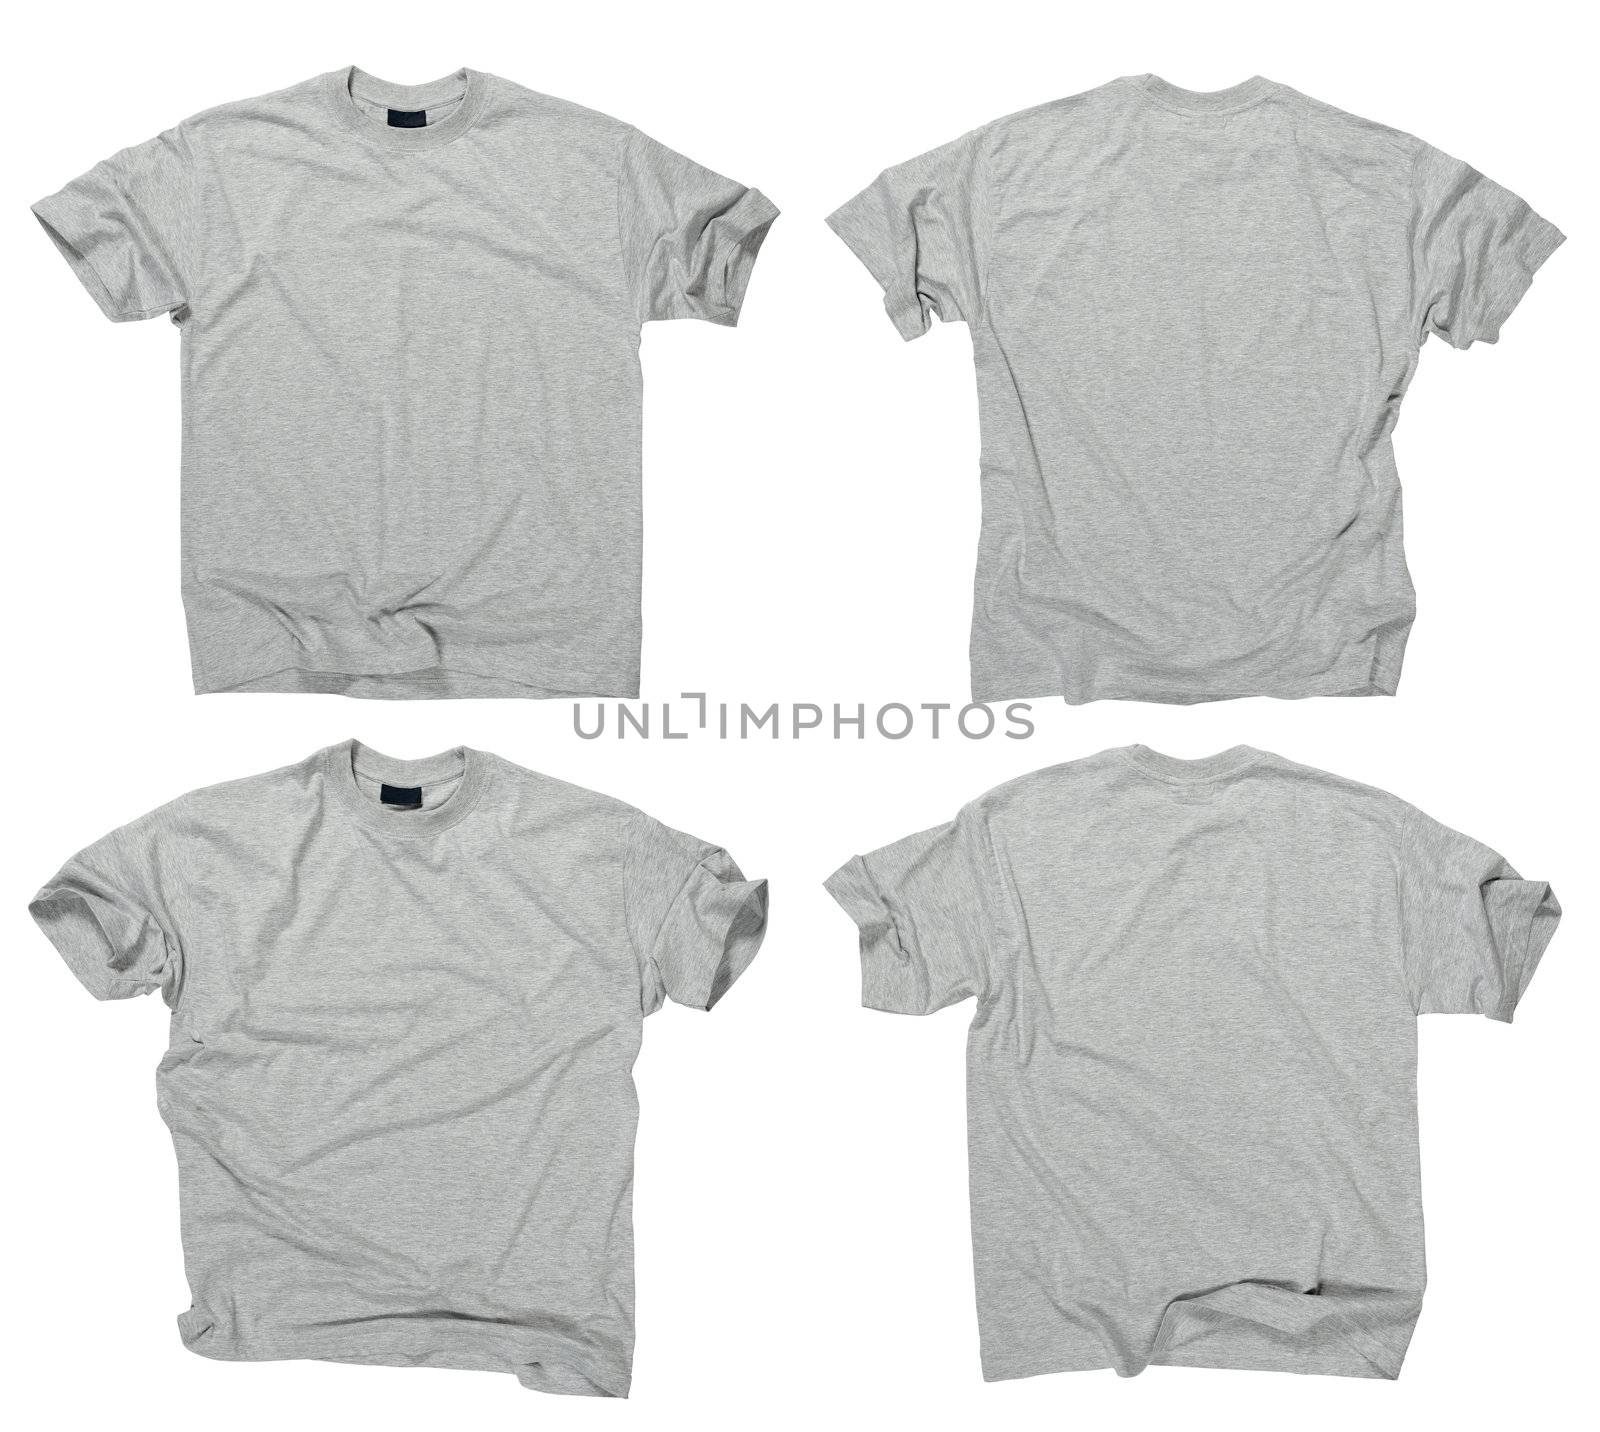 Blank grey t-shirts front and back by sumners